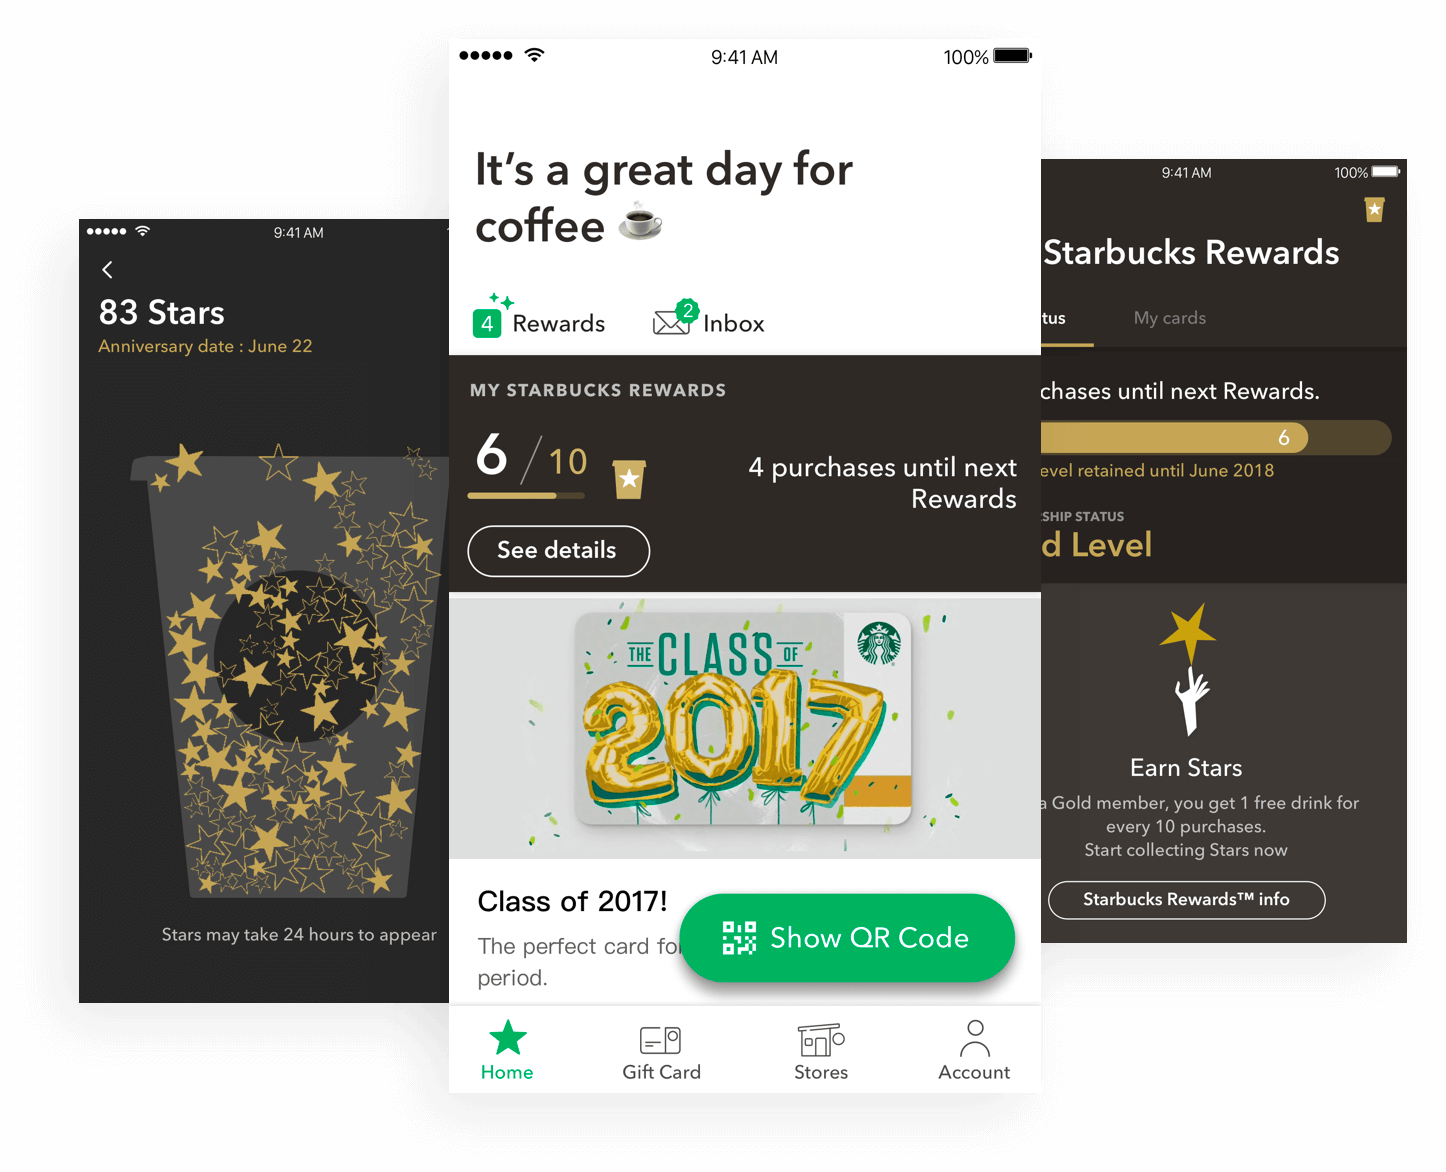 Example of Starbucks promotions